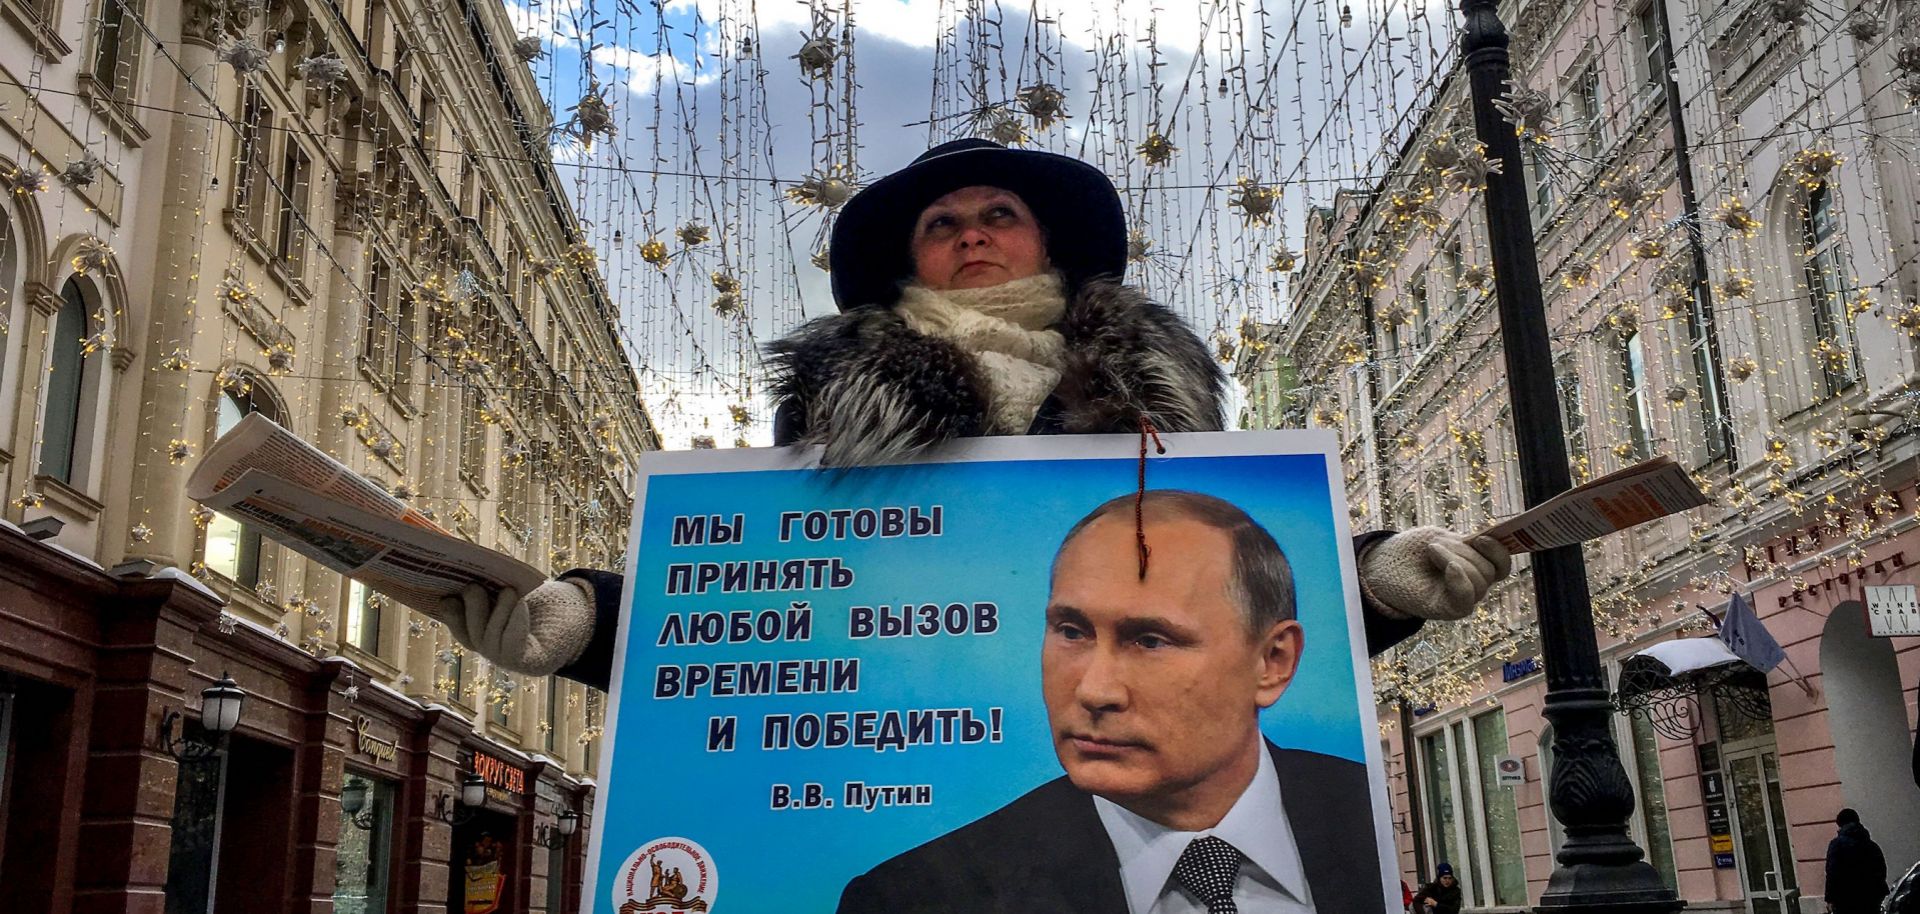 An activist distributes election leaflets in support of Russian President Vladimir Putin in Moscow on March 16.